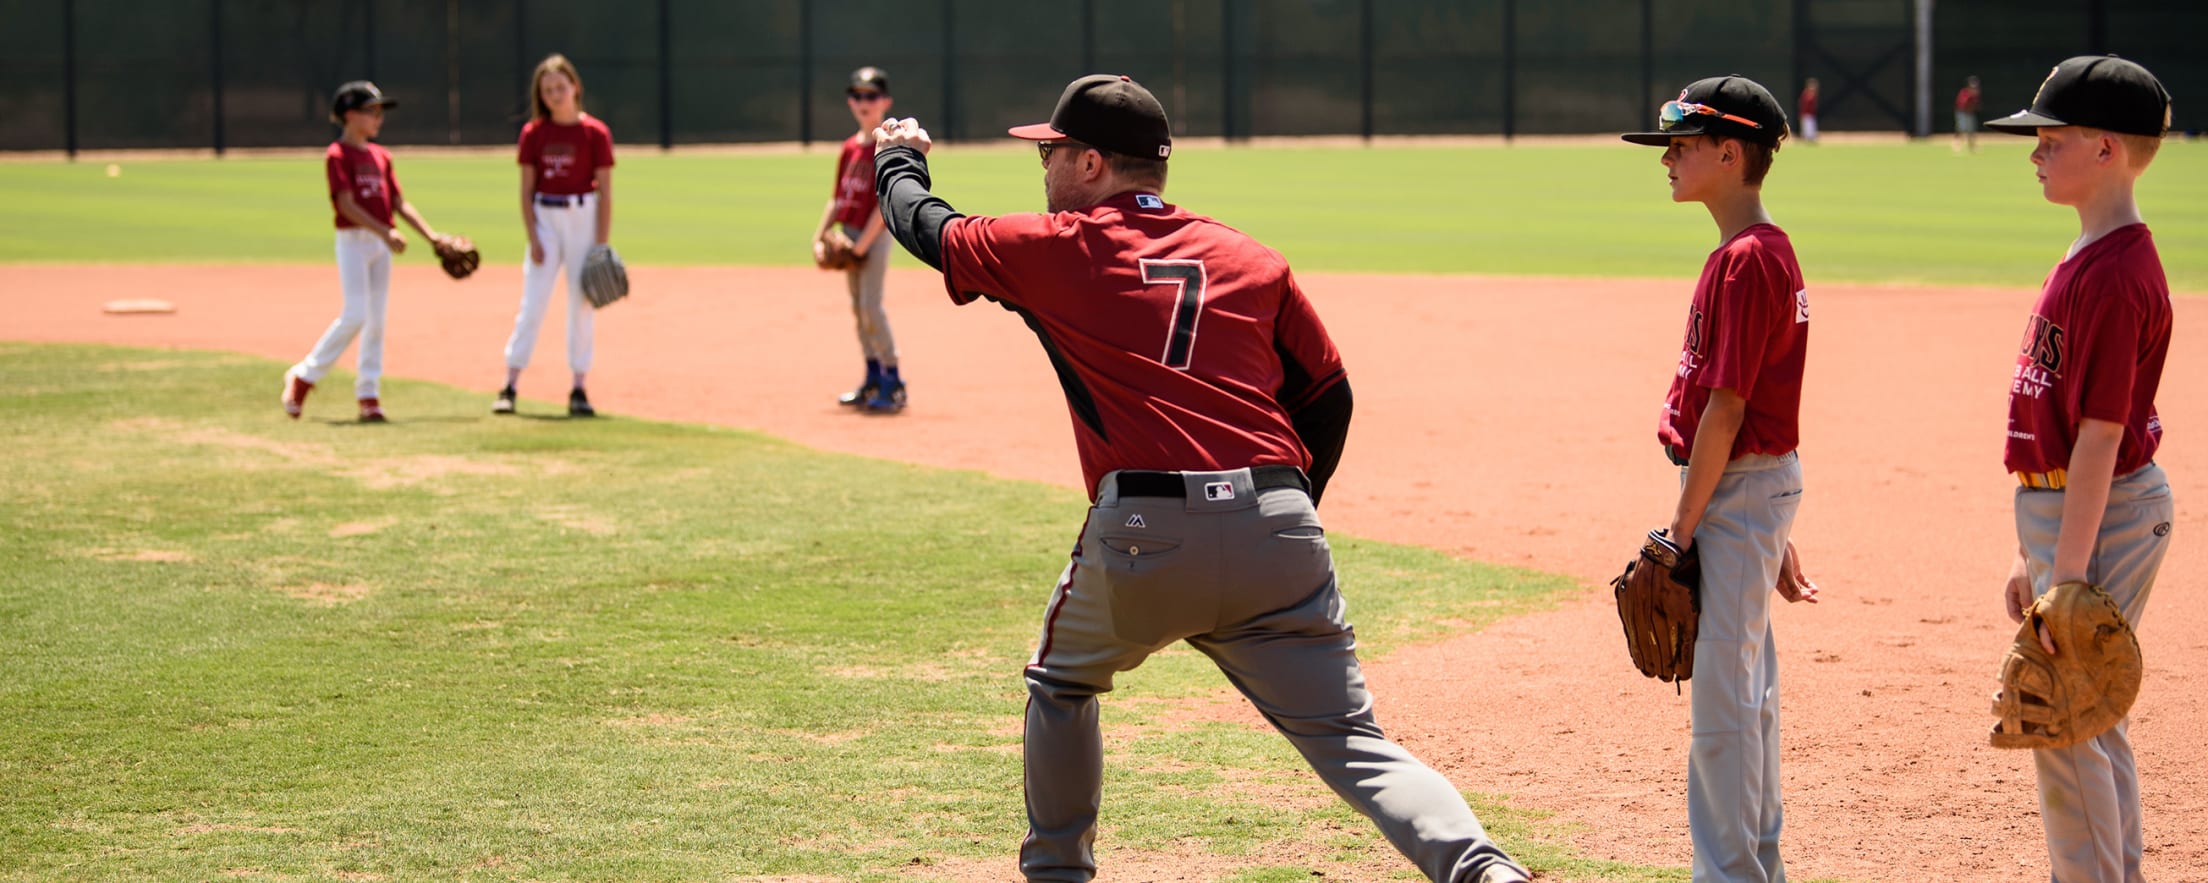 D-backs baseball camp provides life skills, experience for youth (VIDEO), The Daily Courier